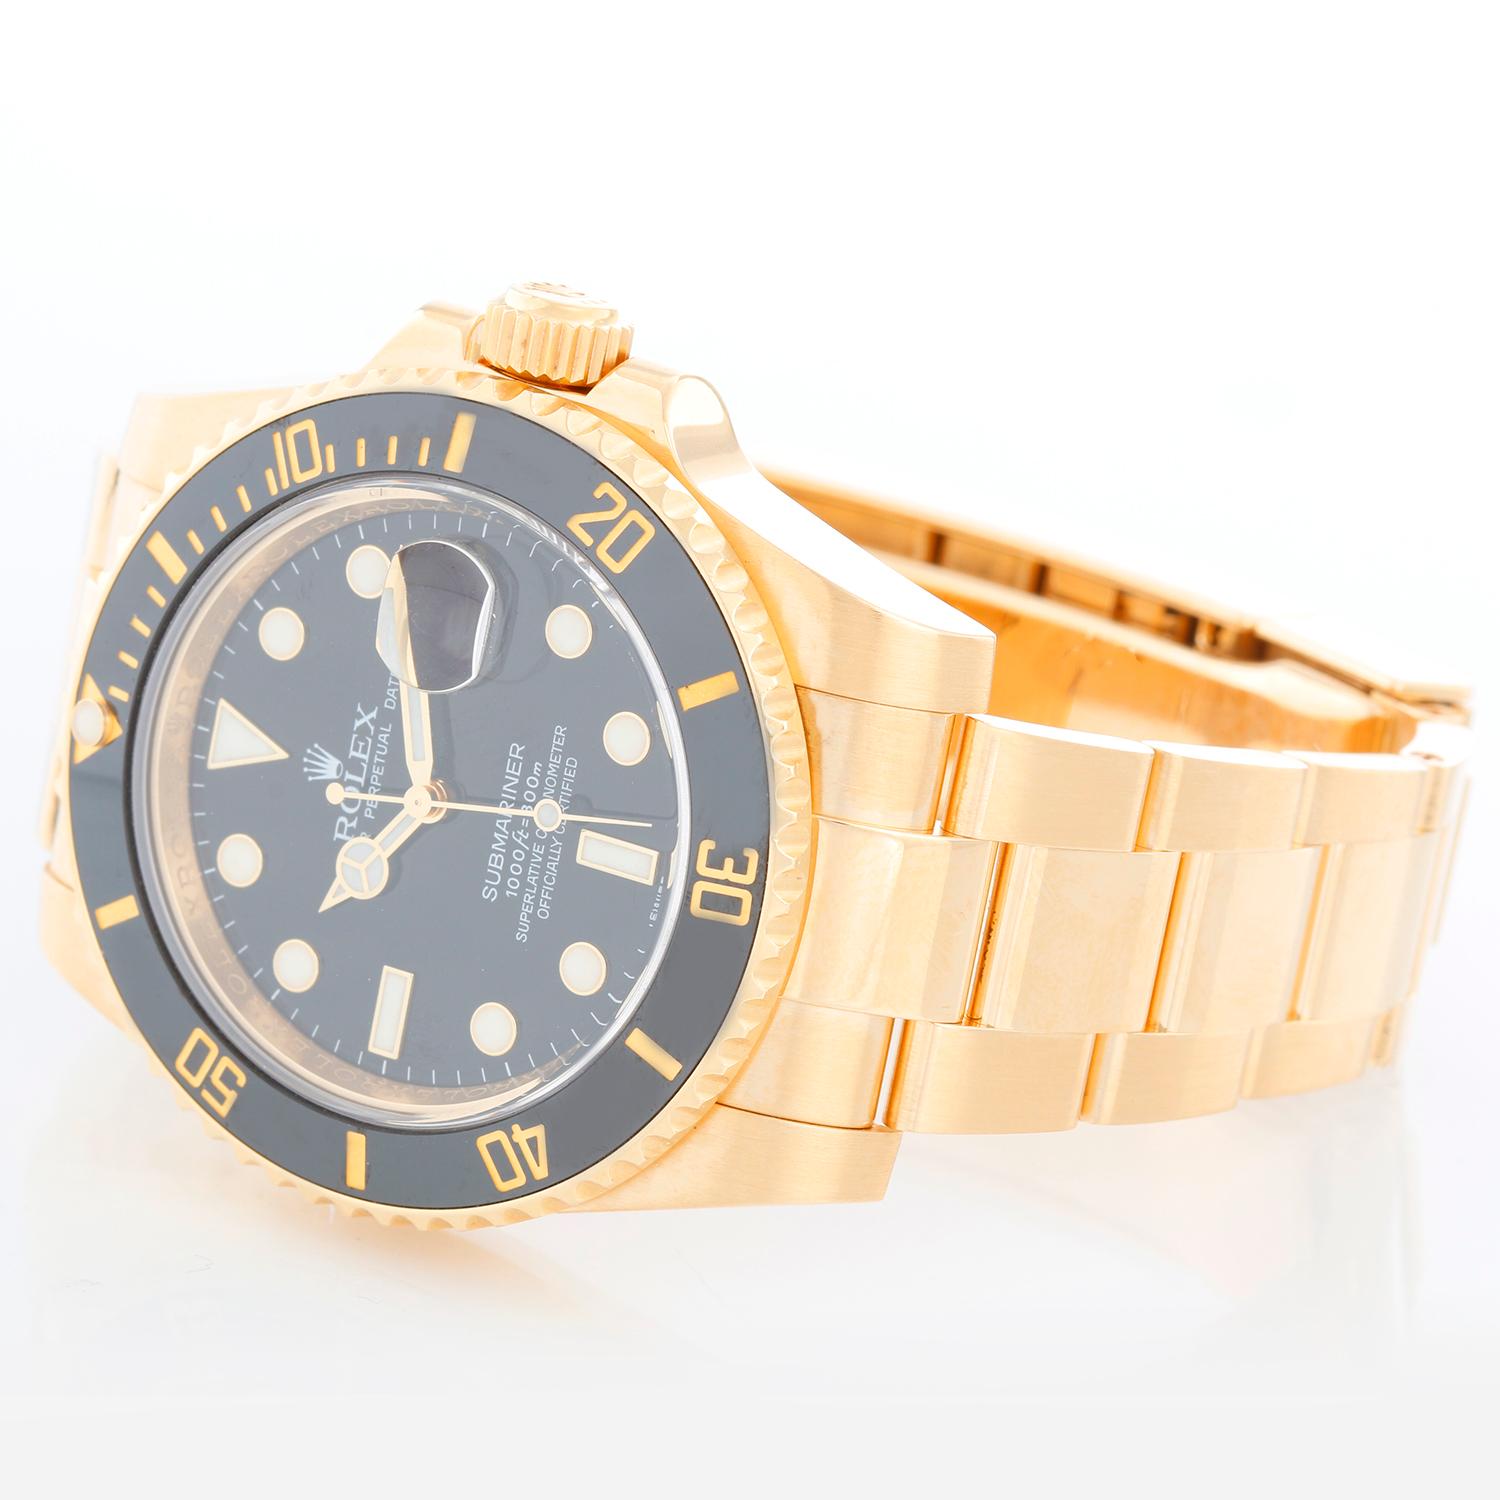 Rolex Submariner Men's 18k Gold Diver's Watch 116618 - Automatic winding, Quickset, sapphire crystal. 18k yellow gold case with rotating ceramic Cerachrom bezel with black insert (40mm diameter). Black dial with luminous style markers. 18k yellow